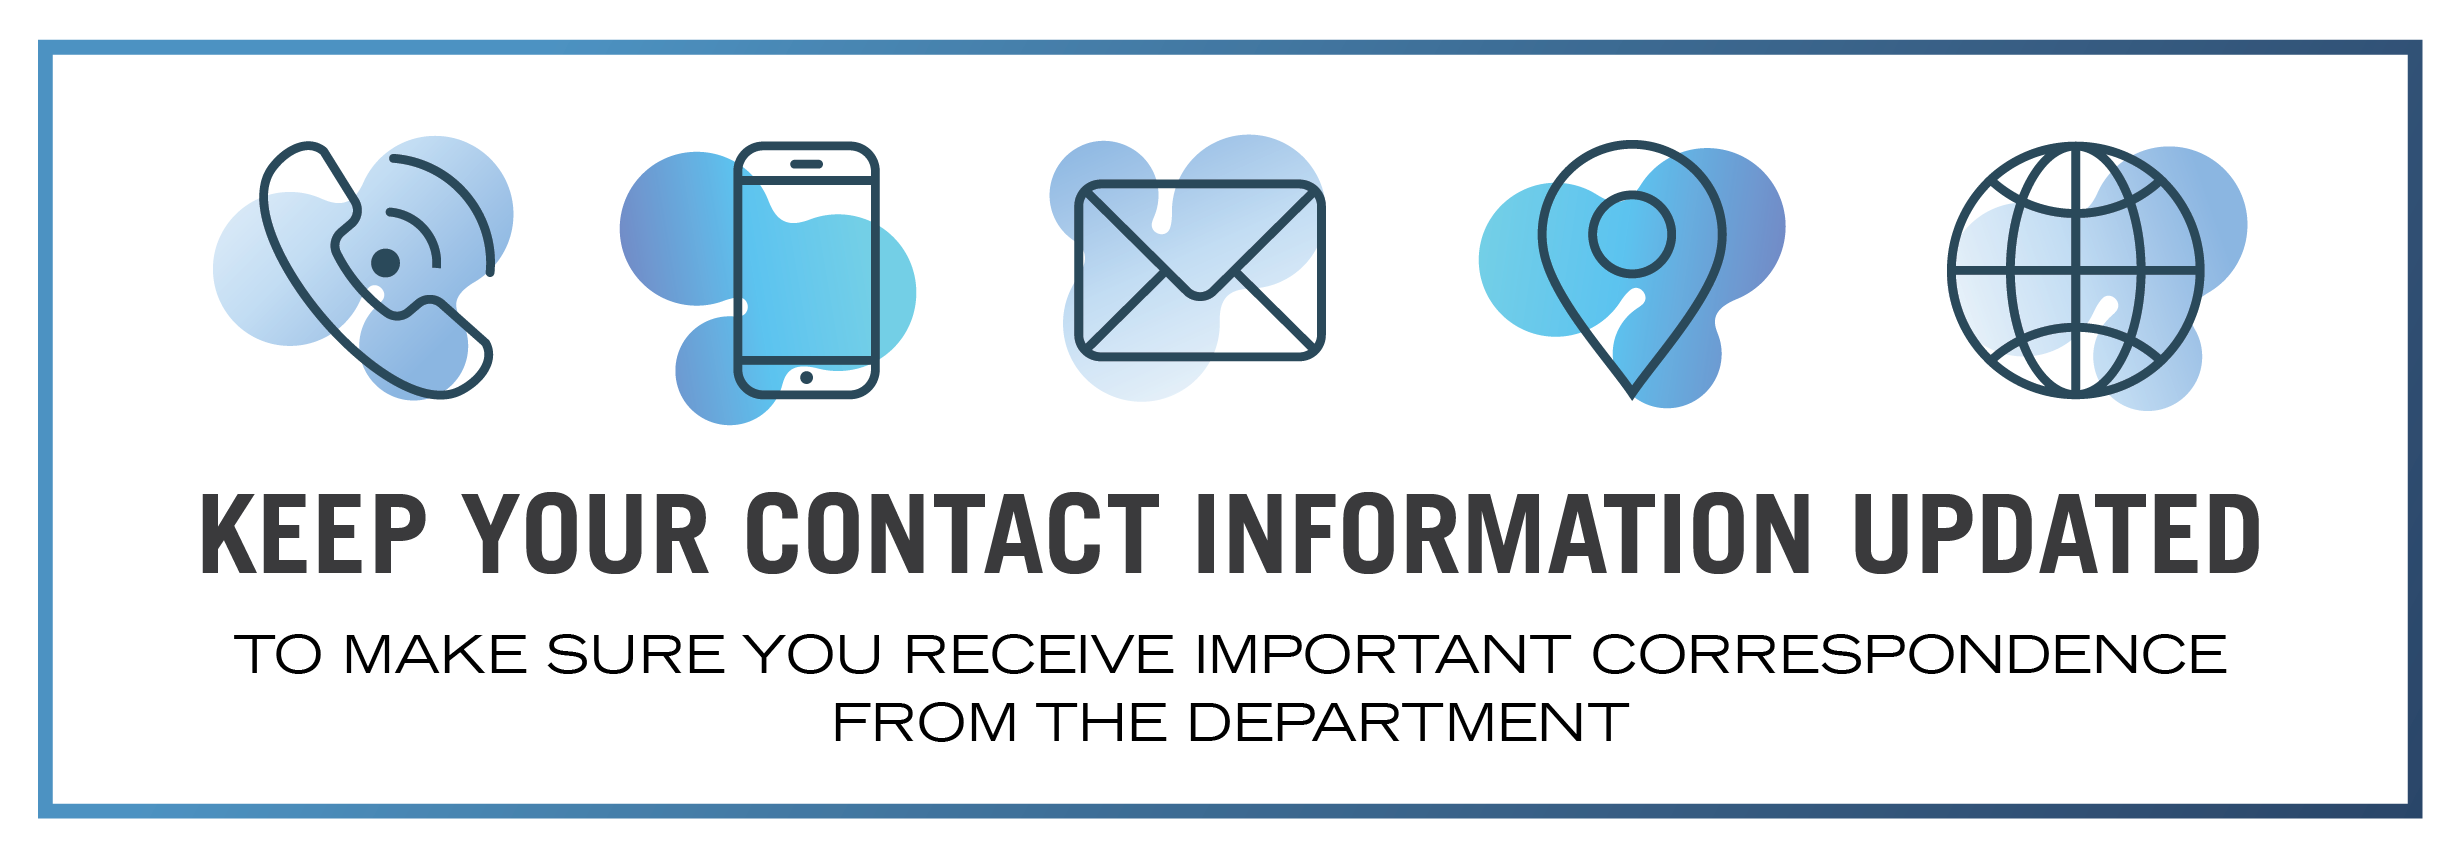 Keep your contact information updated. That way you receive important correspondence from the department.